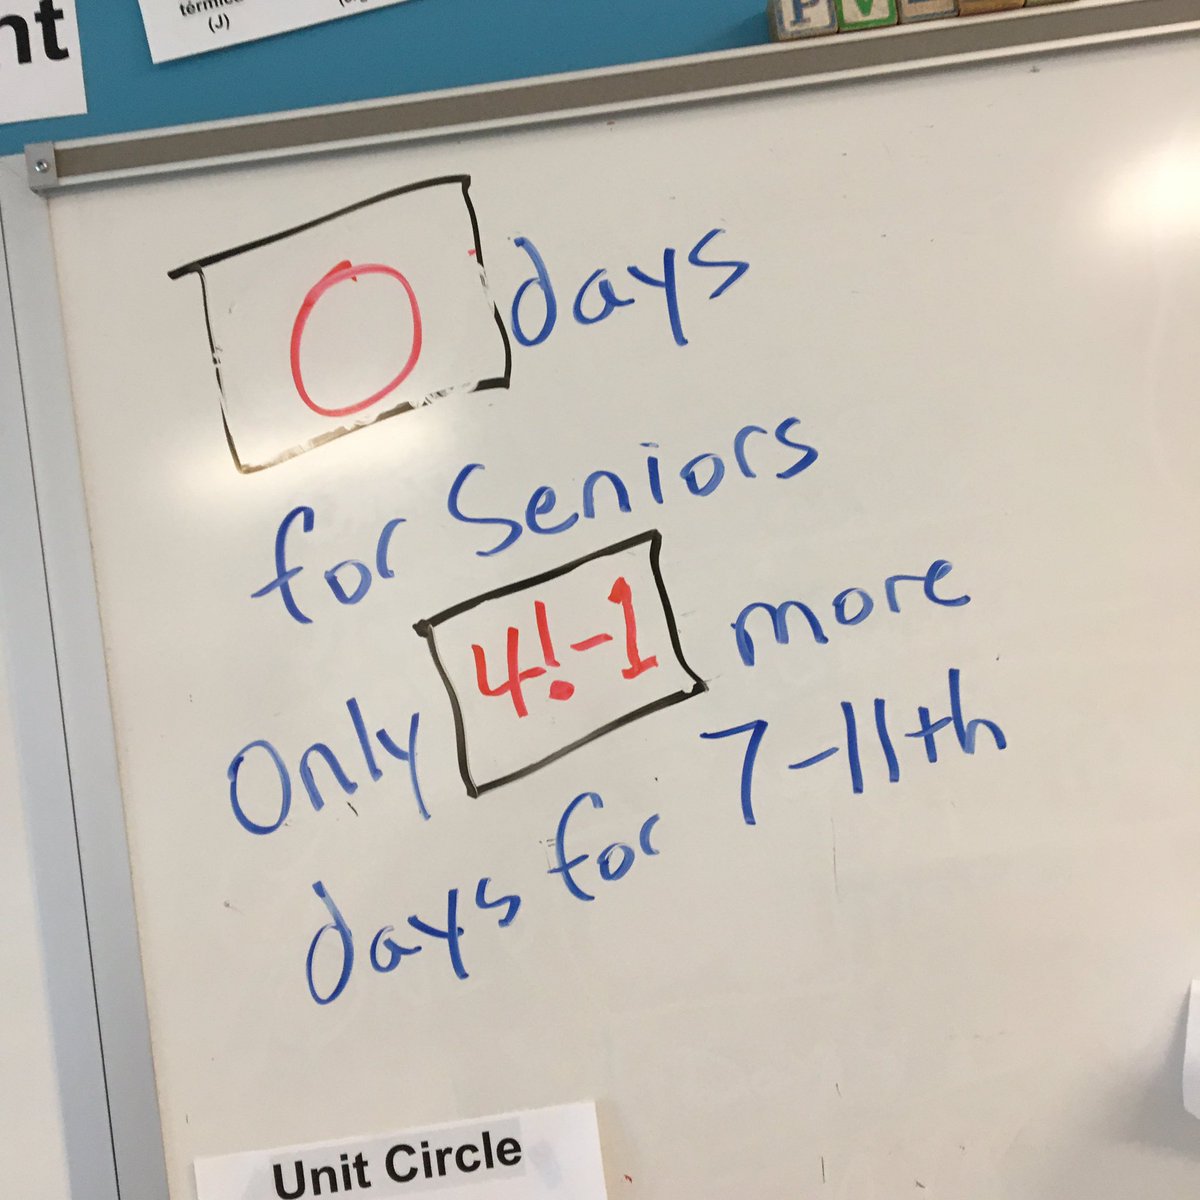 The students reacted just like I hoped to today’s #Countdown to summer vacation… “How do the seniors have 0 days?” “That’s not zero.” “Oh, it’s an O for oxygen…it’s 8!”